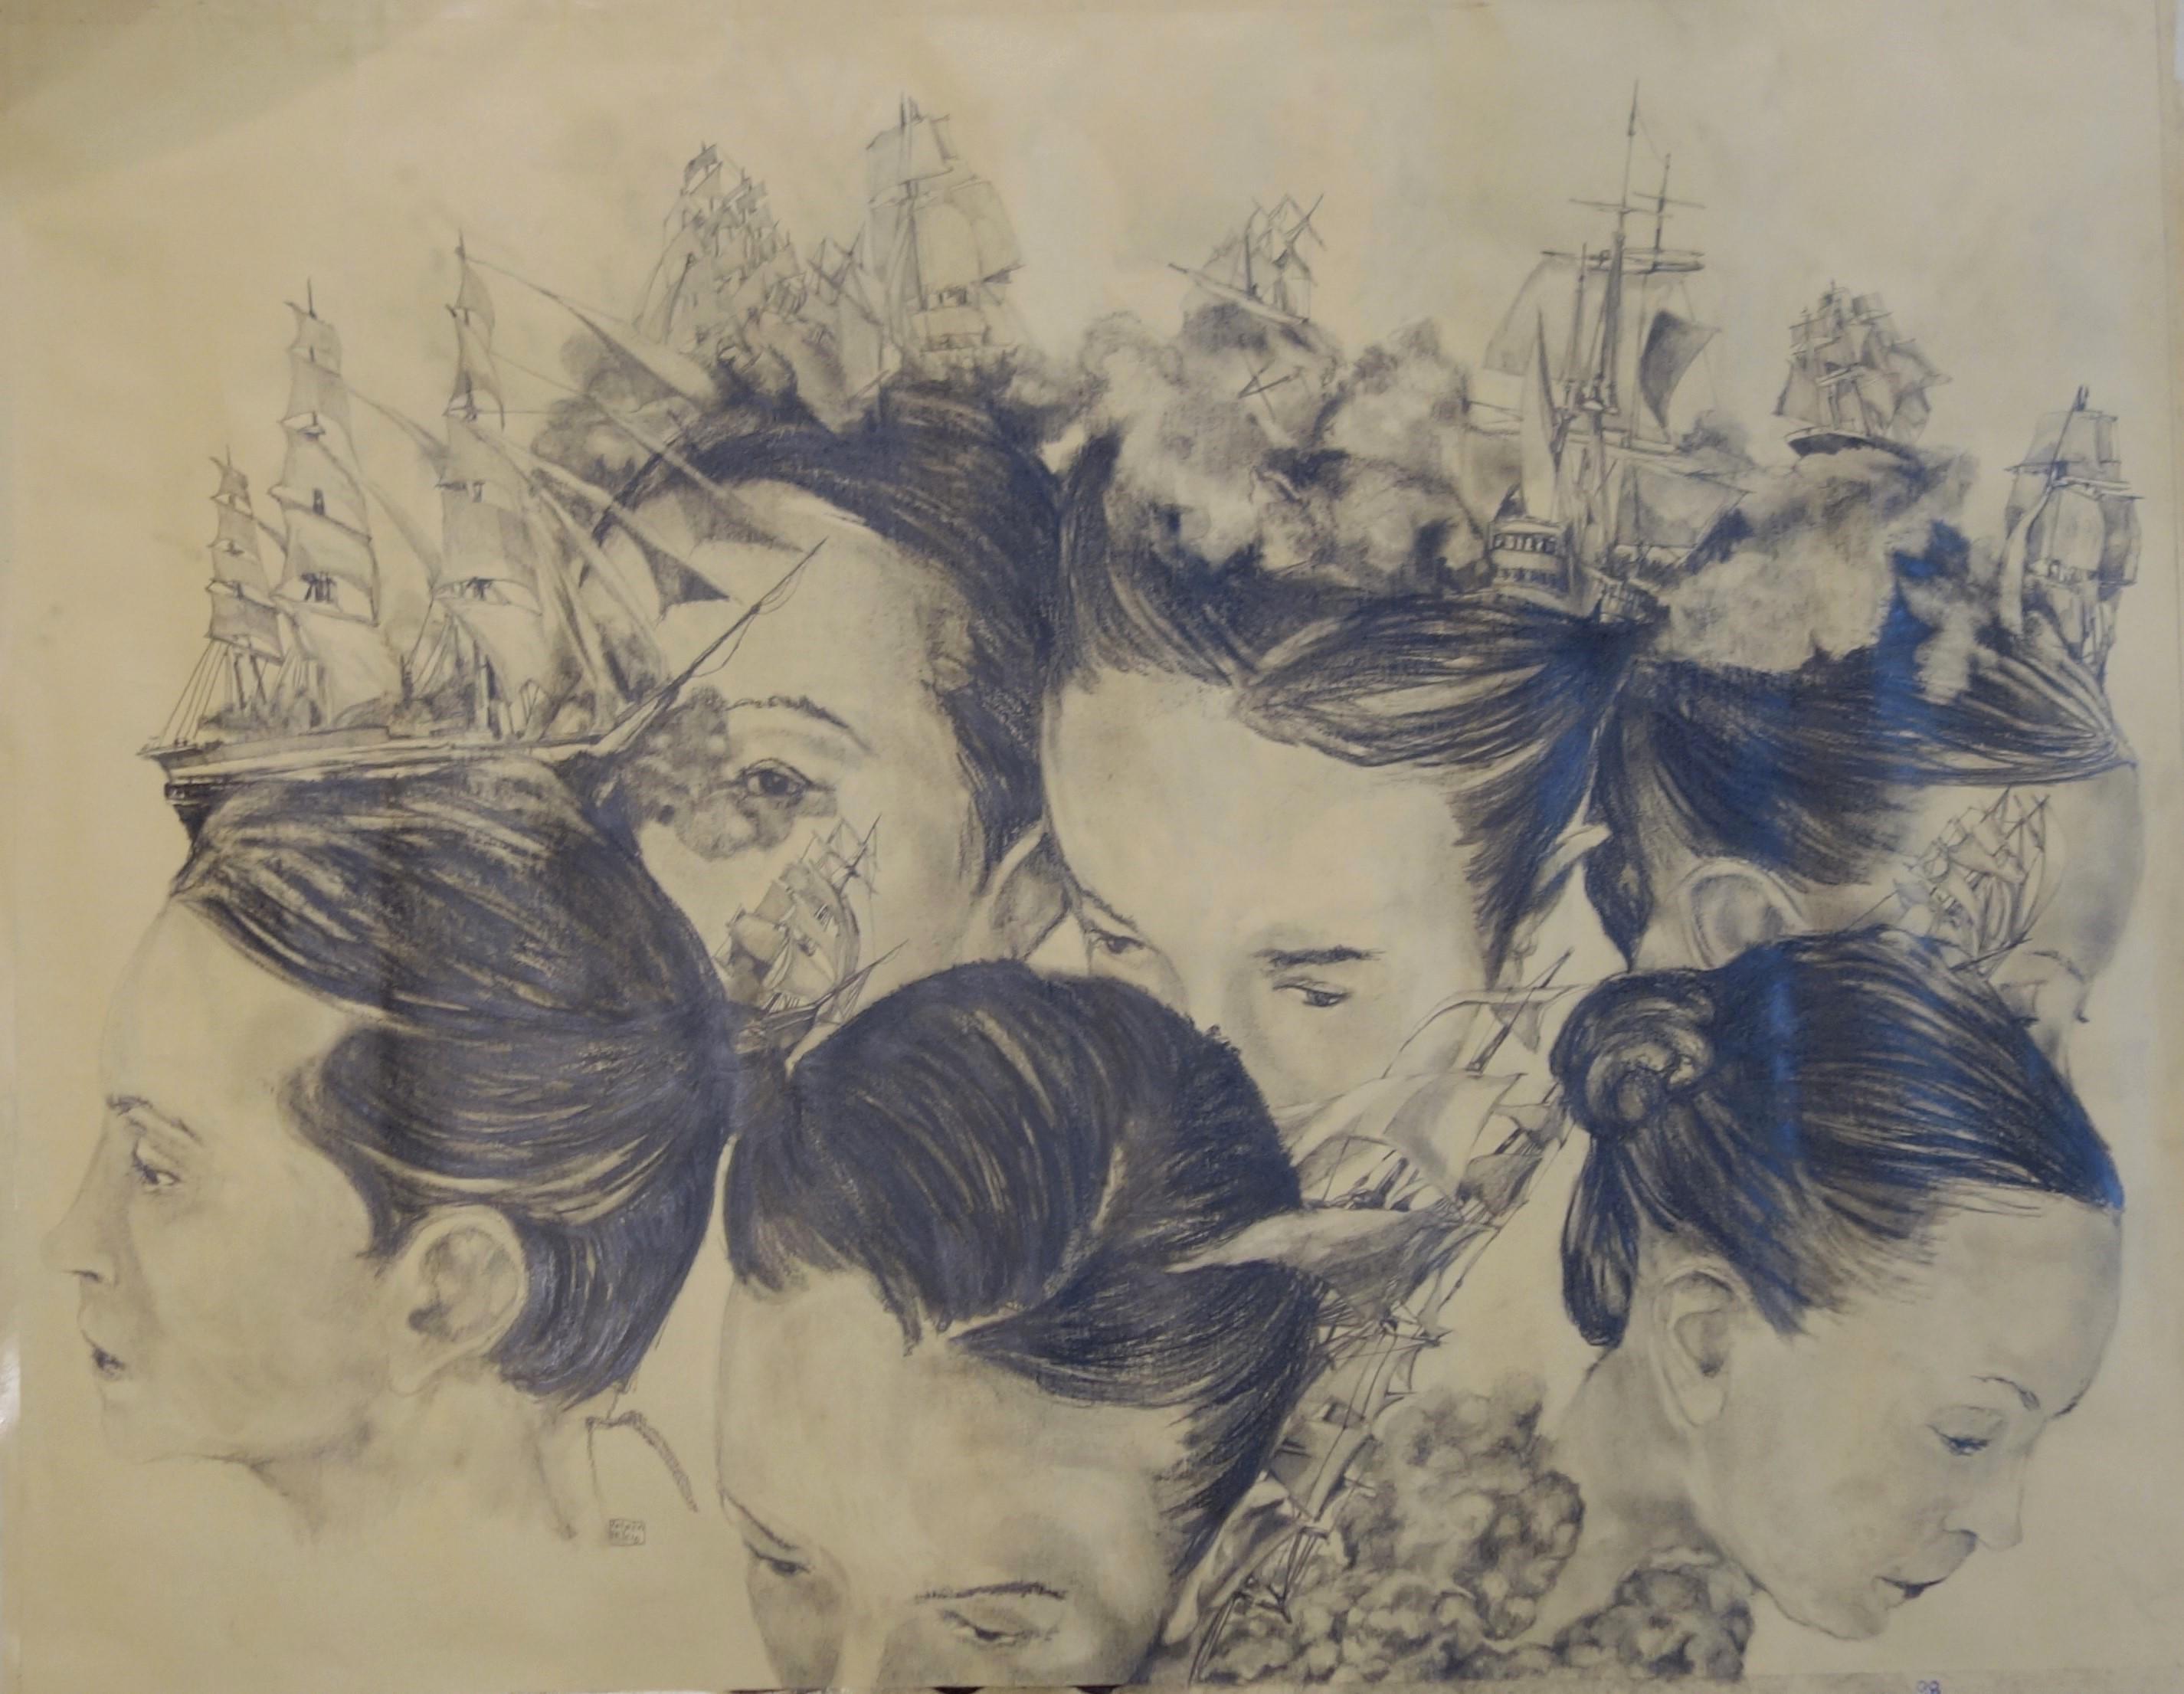 Andrea Pescio Figurative Painting - "Battle in my mind  II "  Faces of women and ships , pencil  cm. 98 x 76